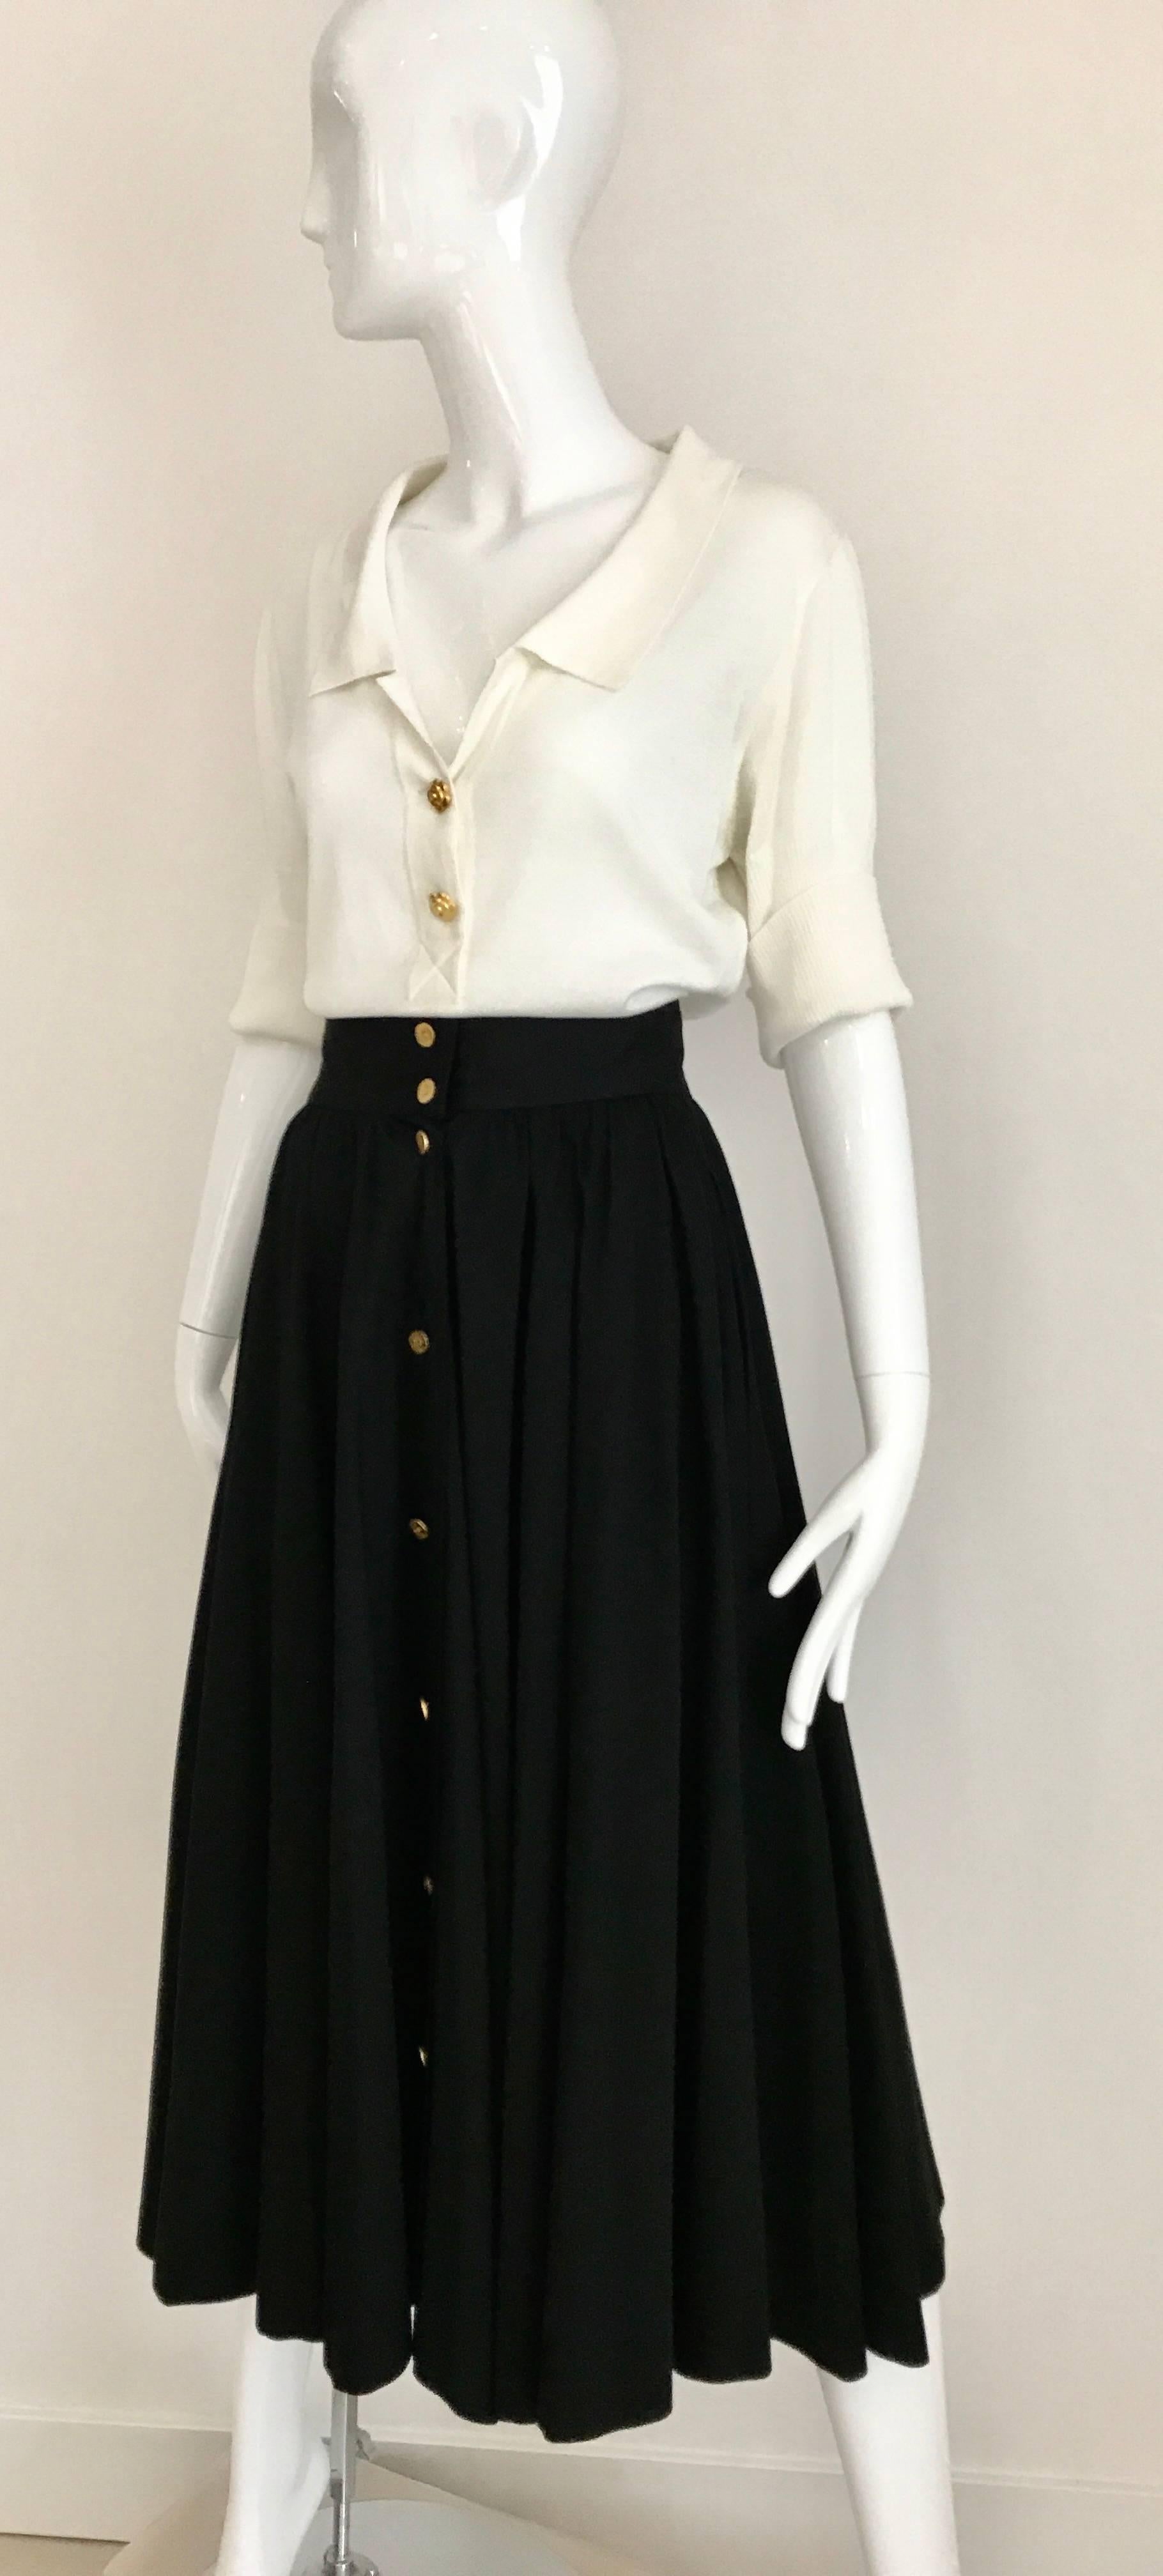 Women's 1970s CHANEL Black Cotton Skirt with Chanel Gold Button